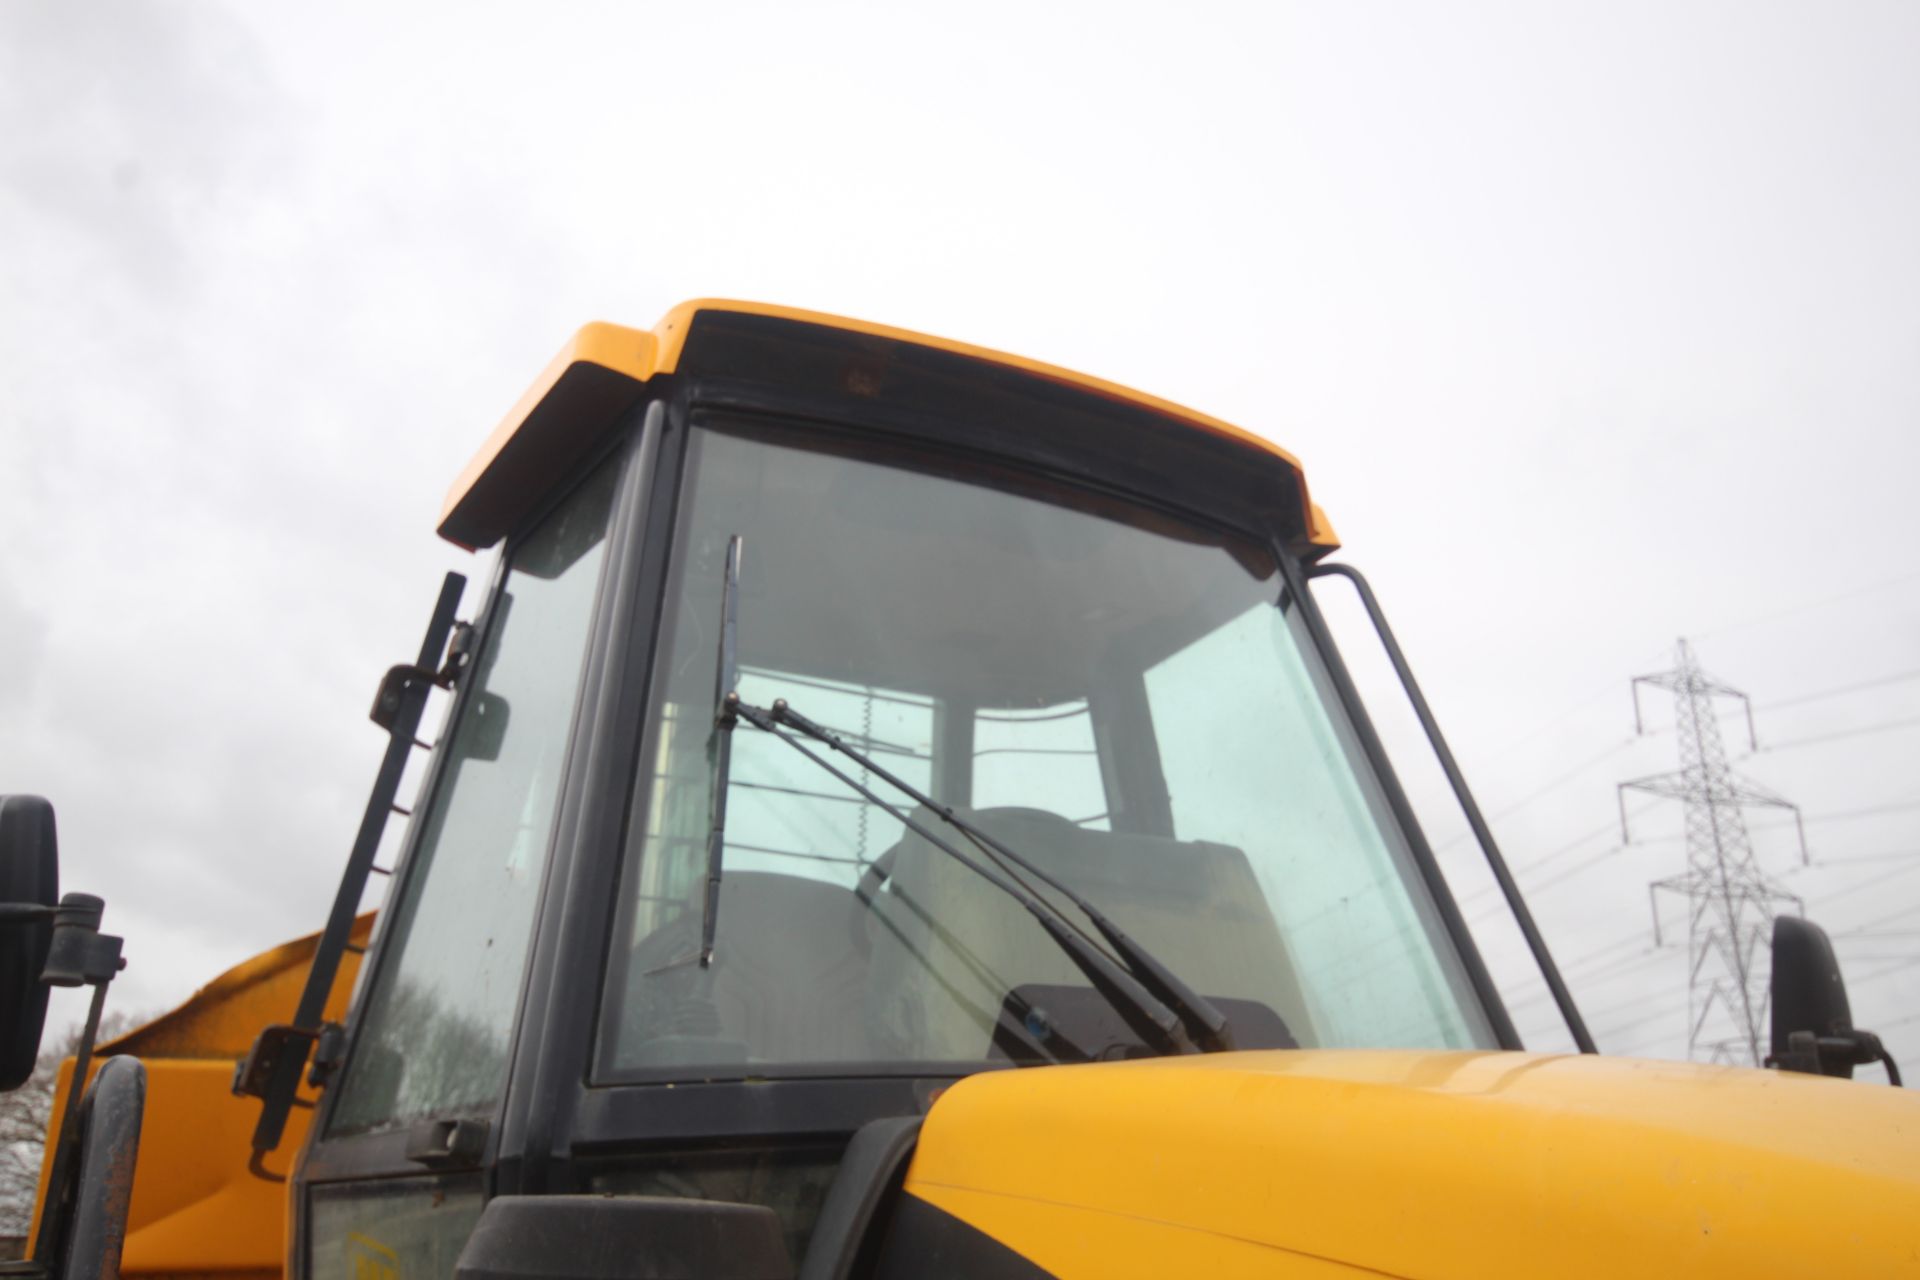 JCB 714 14T 4WD dumper. 2006. 6,088 hours. Serial number SLP714AT6EO830370. Owned from new. Key - Image 53 of 108